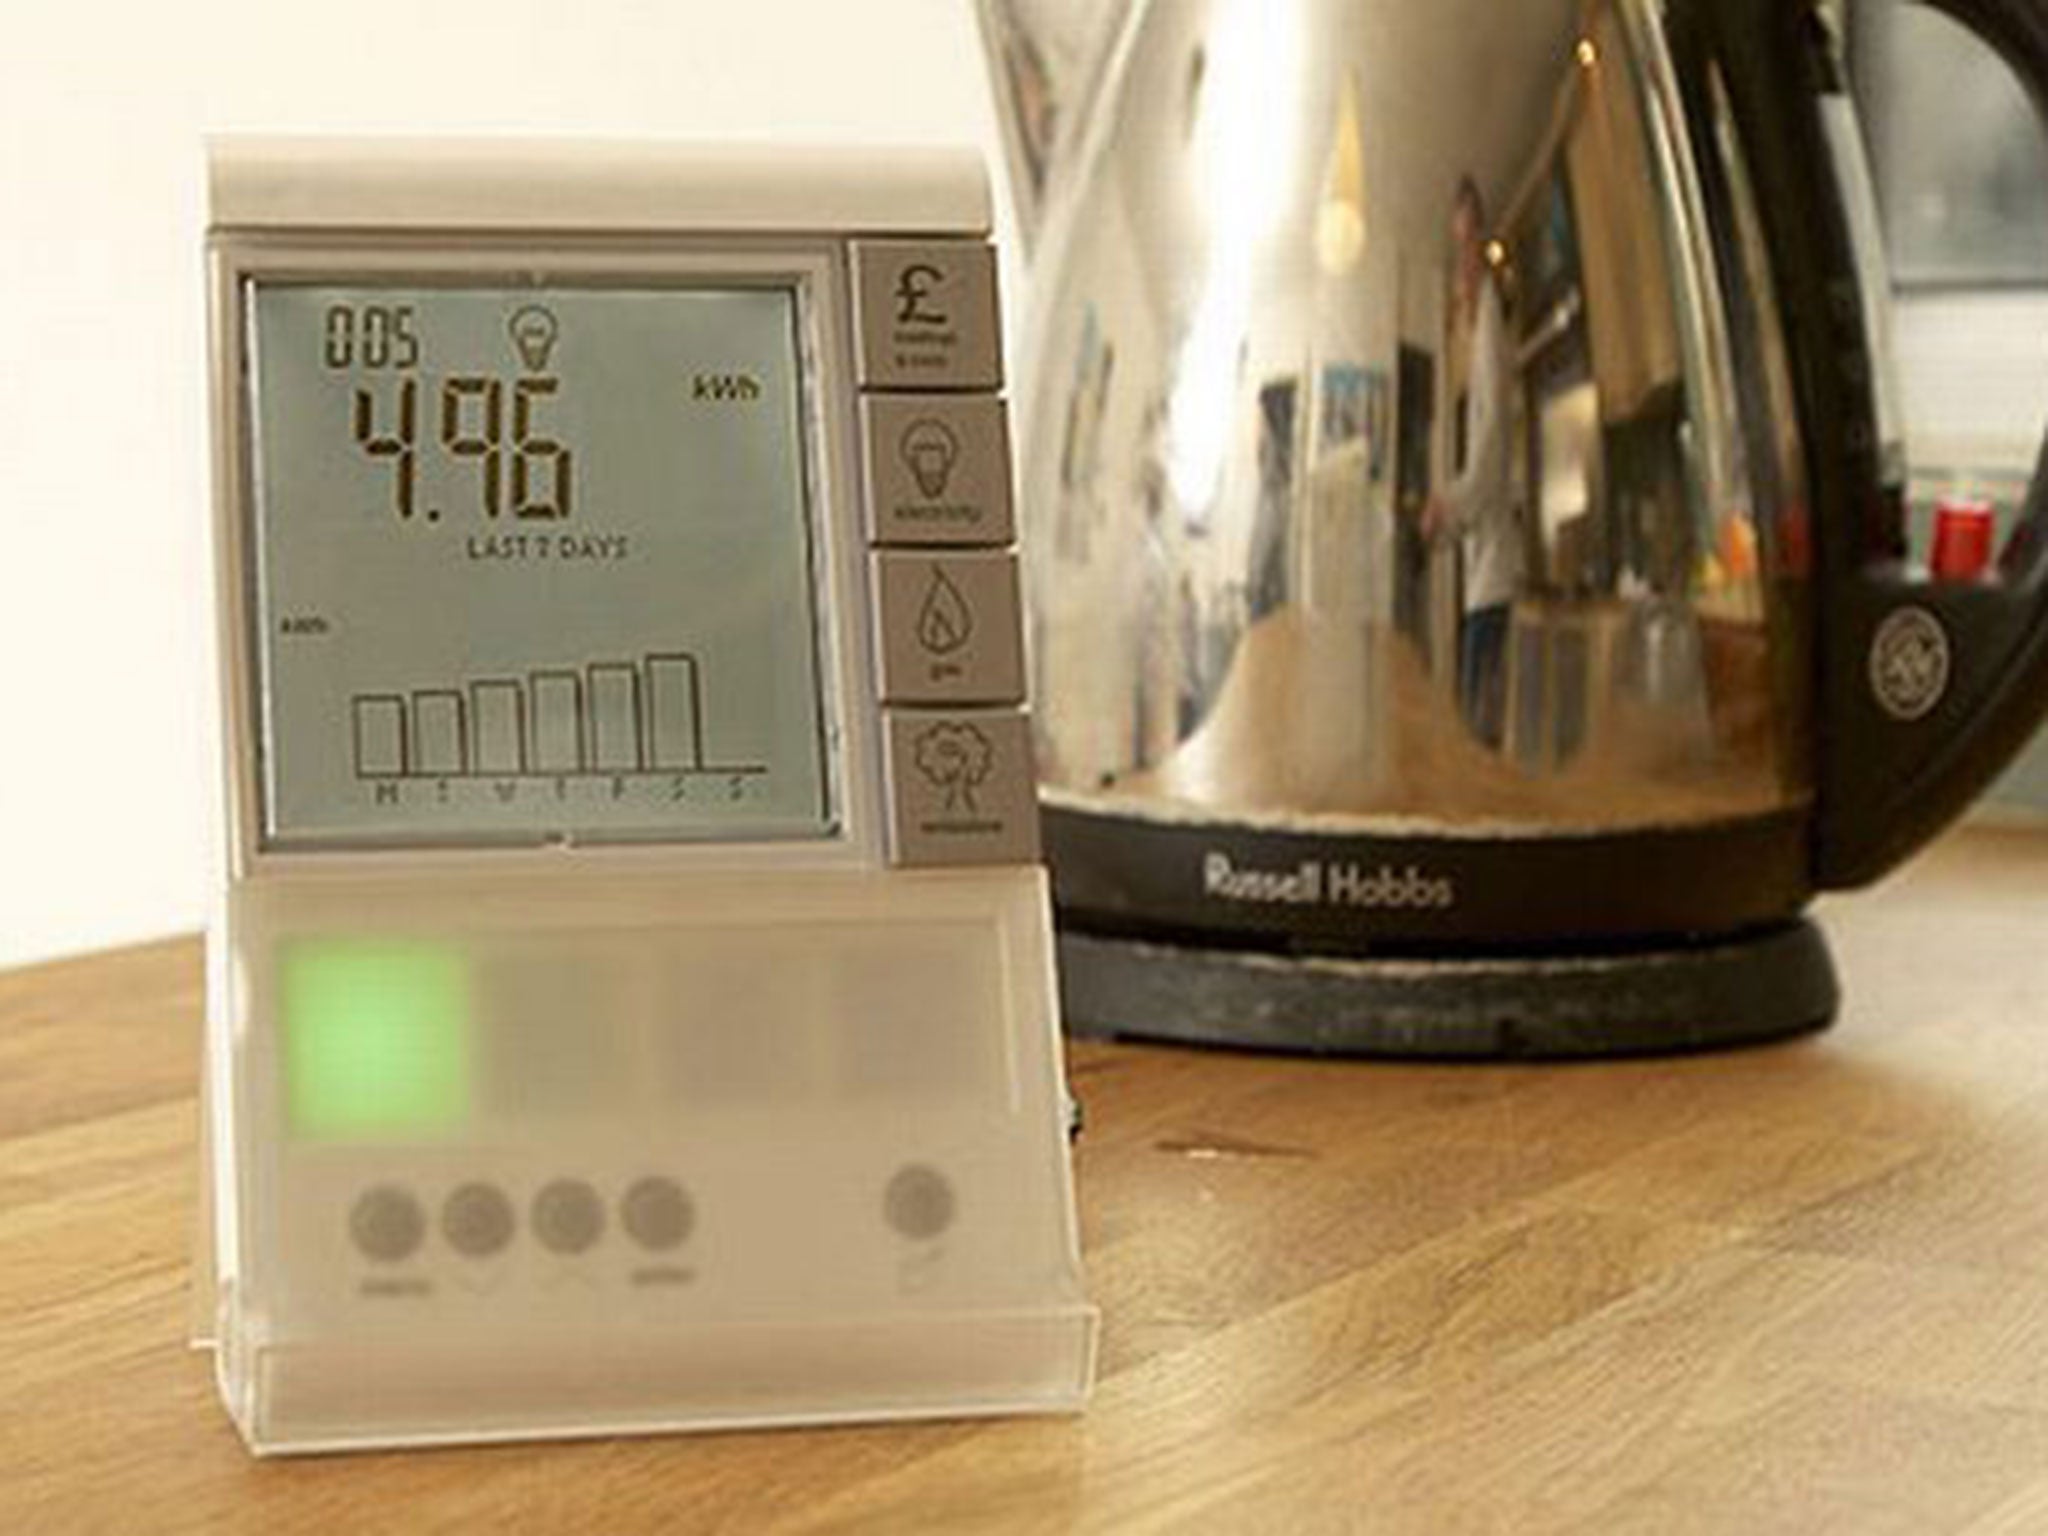 At the end of 2015, a £10.9bn programme will attempt to ensure a smart meter is installed in every UK home by 2020